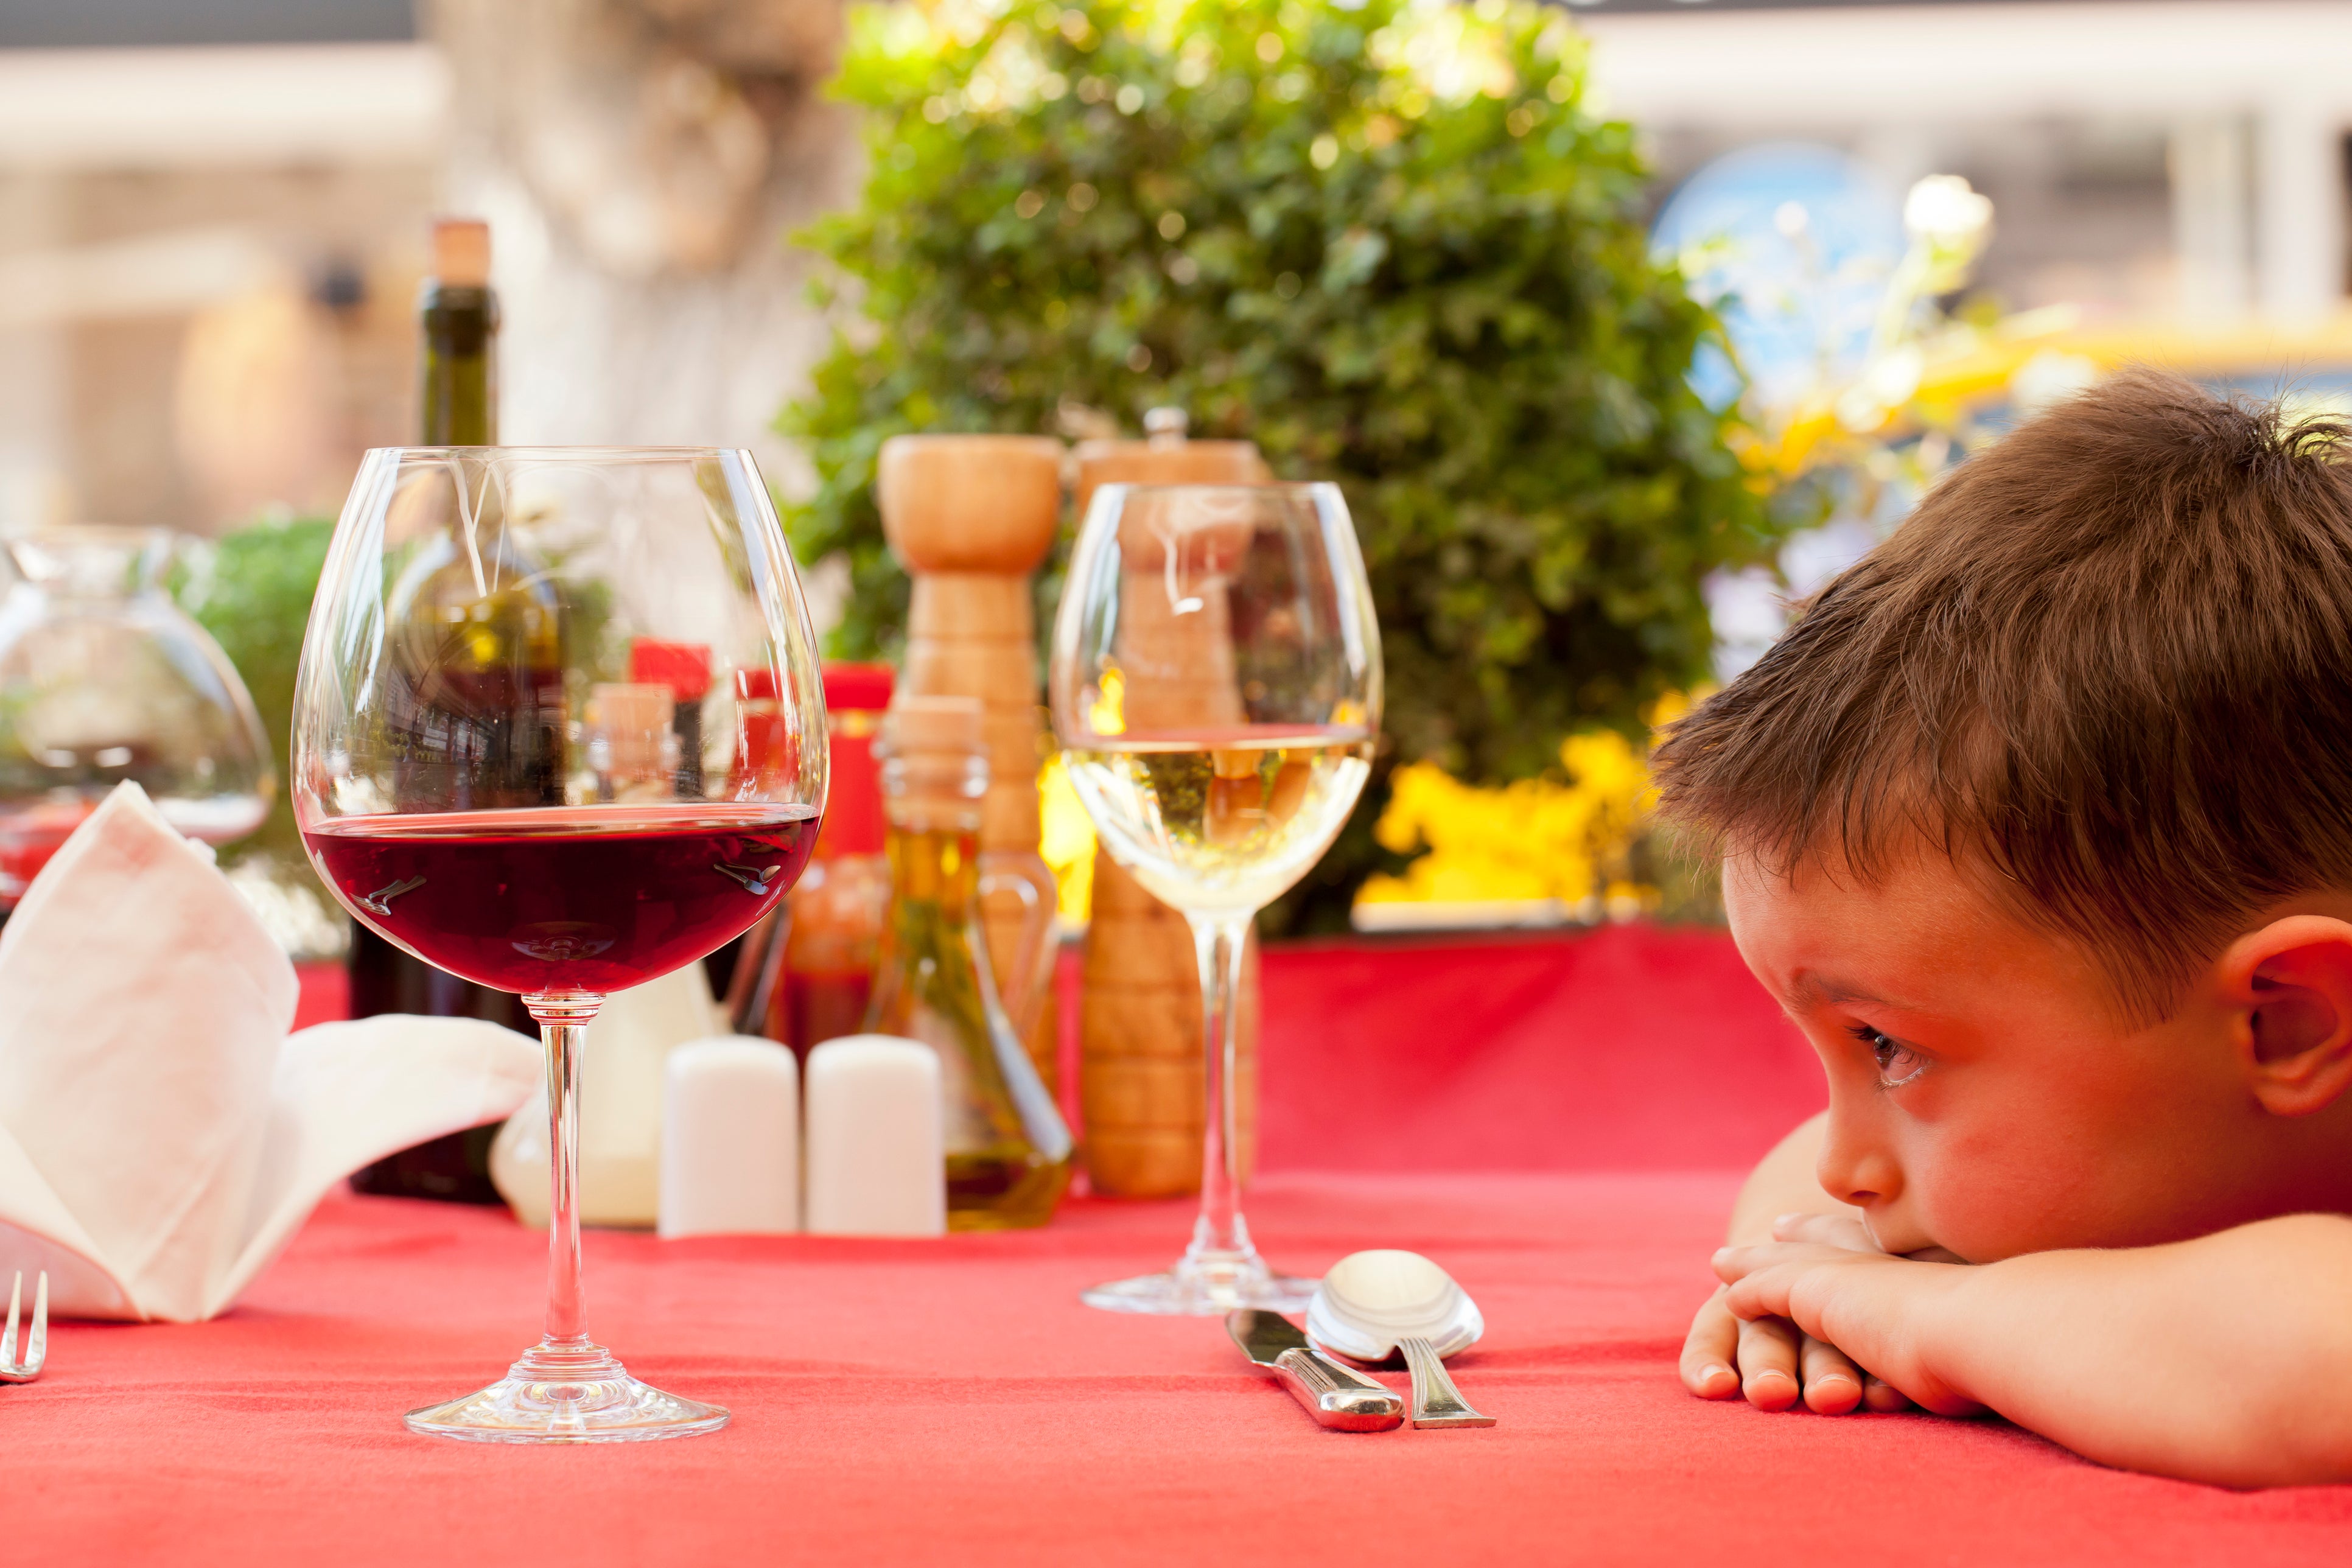 Dr Sigman rejects the ‘French family’ approach to alcohol, which sees adults introducing children to alcohol at a young age